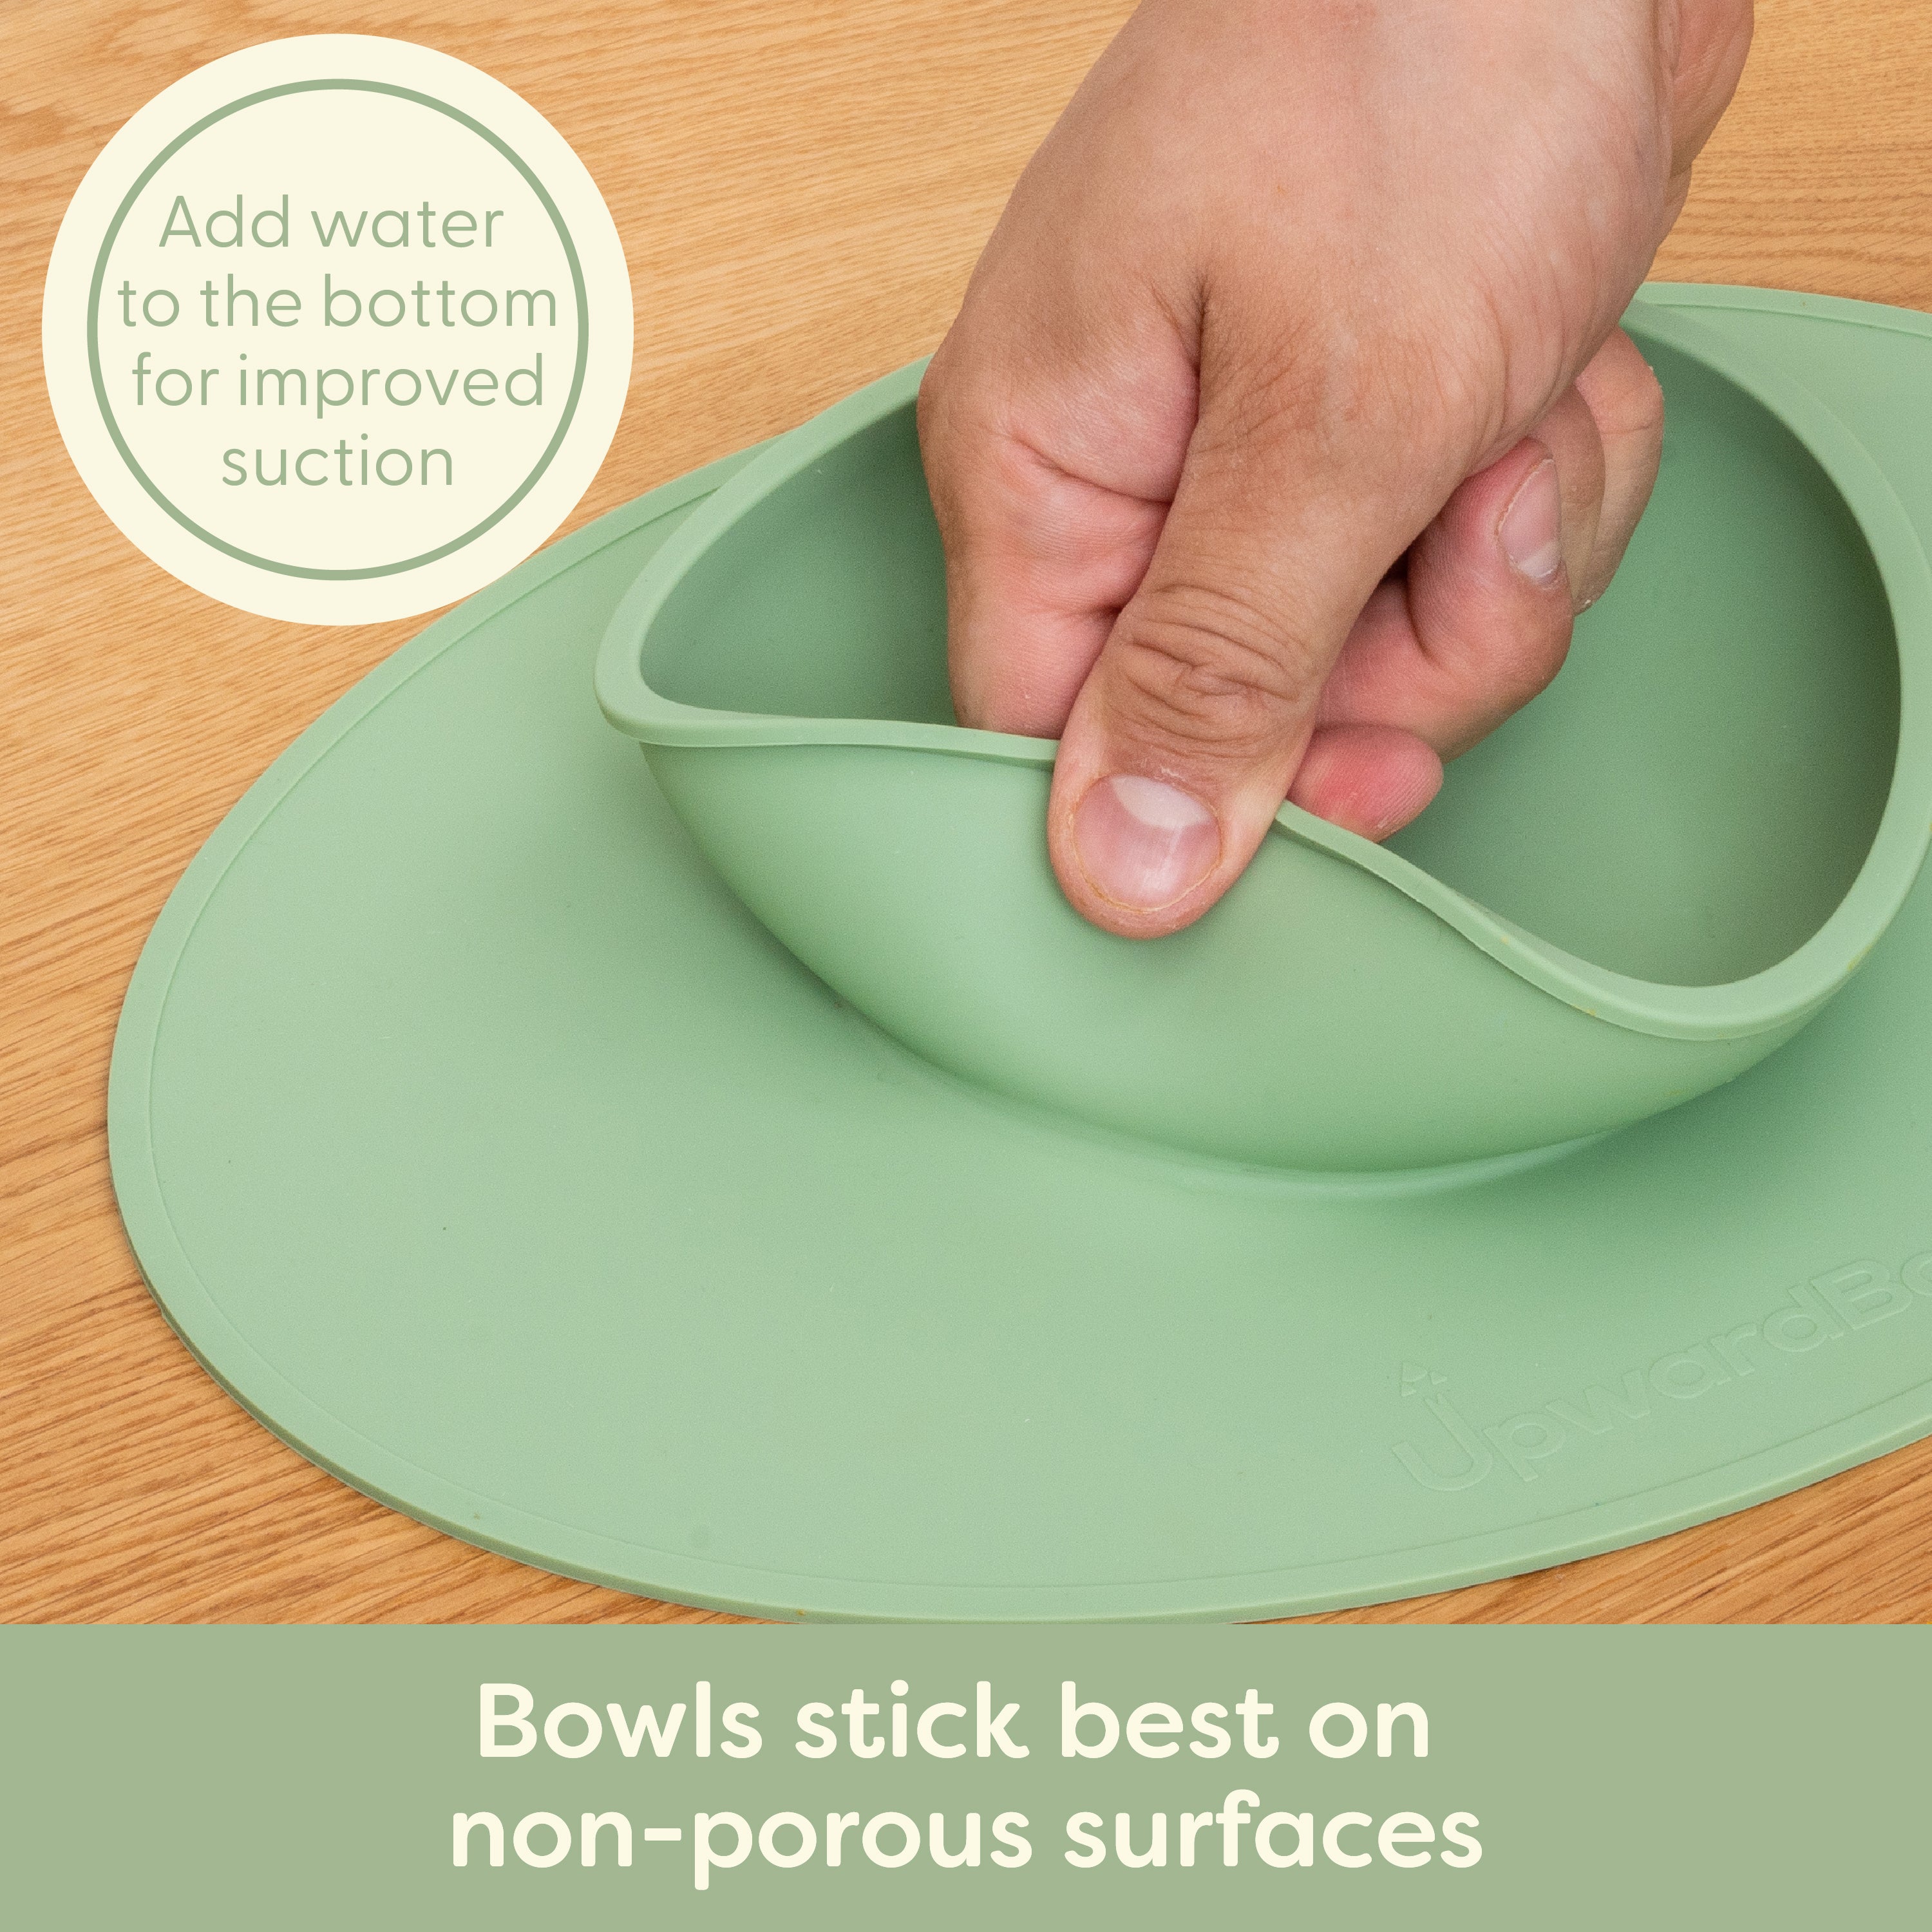 Baby Led Weaning Set With Bibs, Spoons, A Suction Bowl and Suction Pla –  UpwardBaby